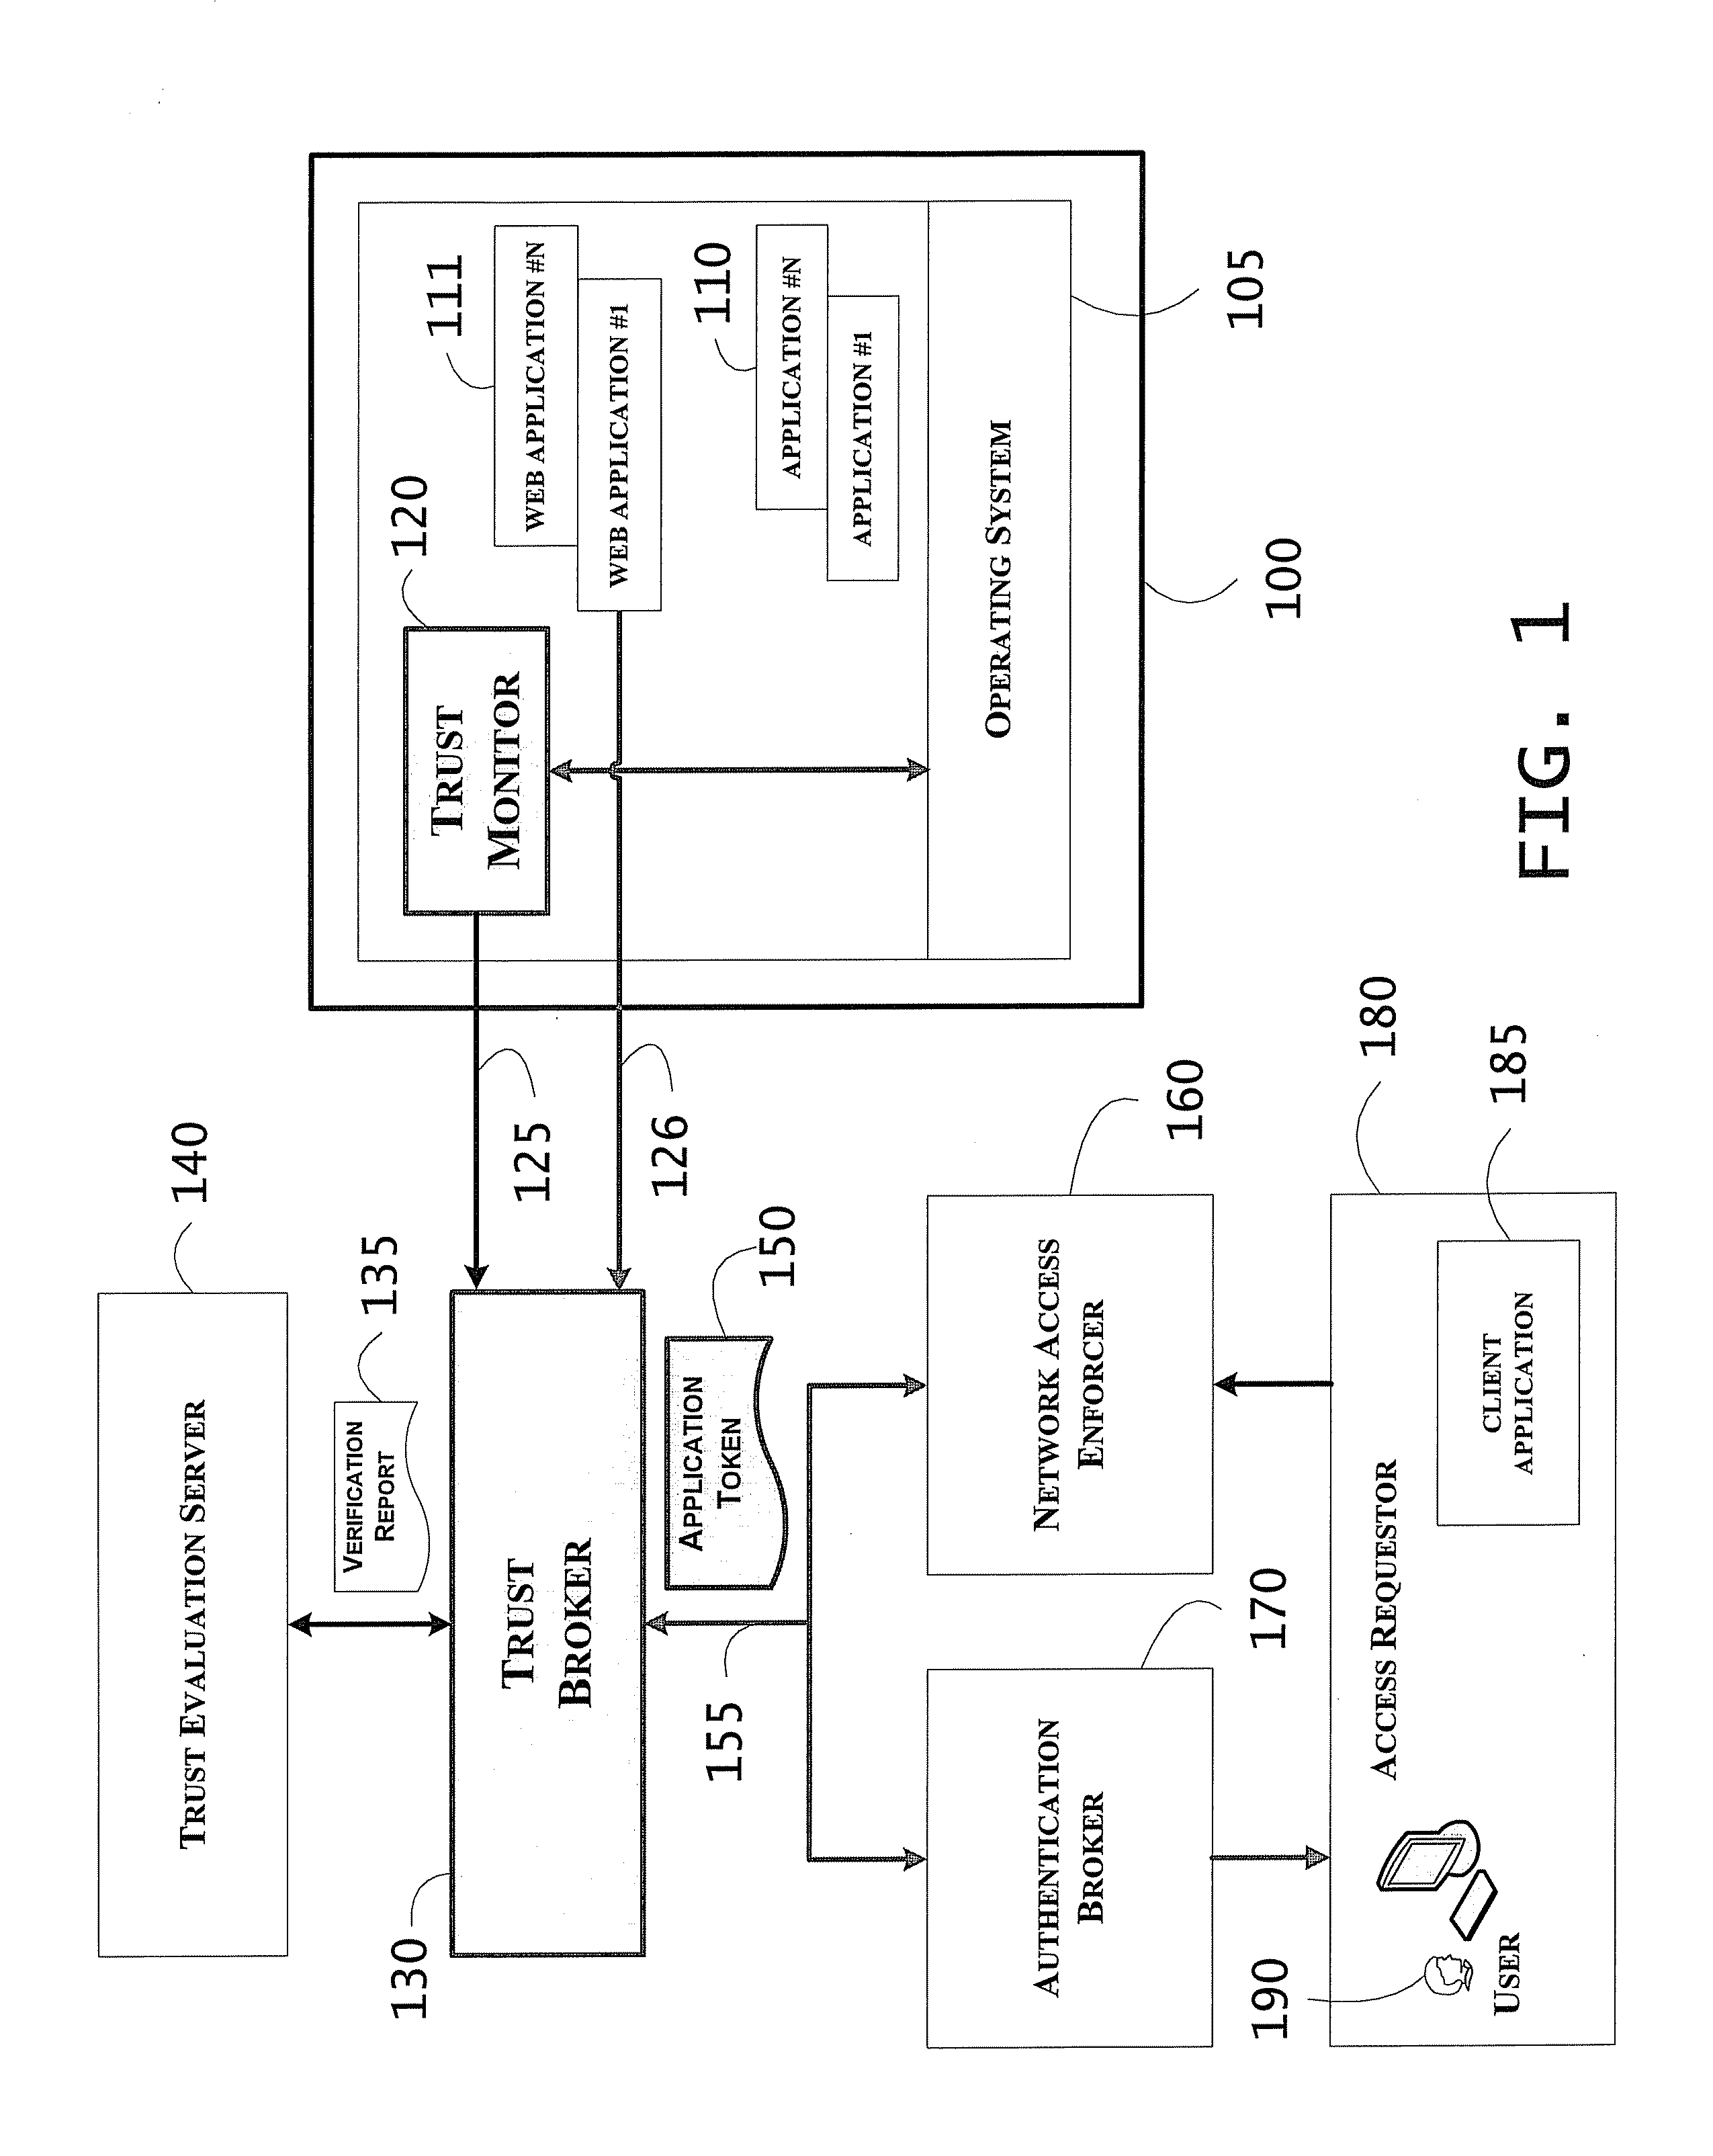 System including property-based weighted trust score application tokens for access control and related methods